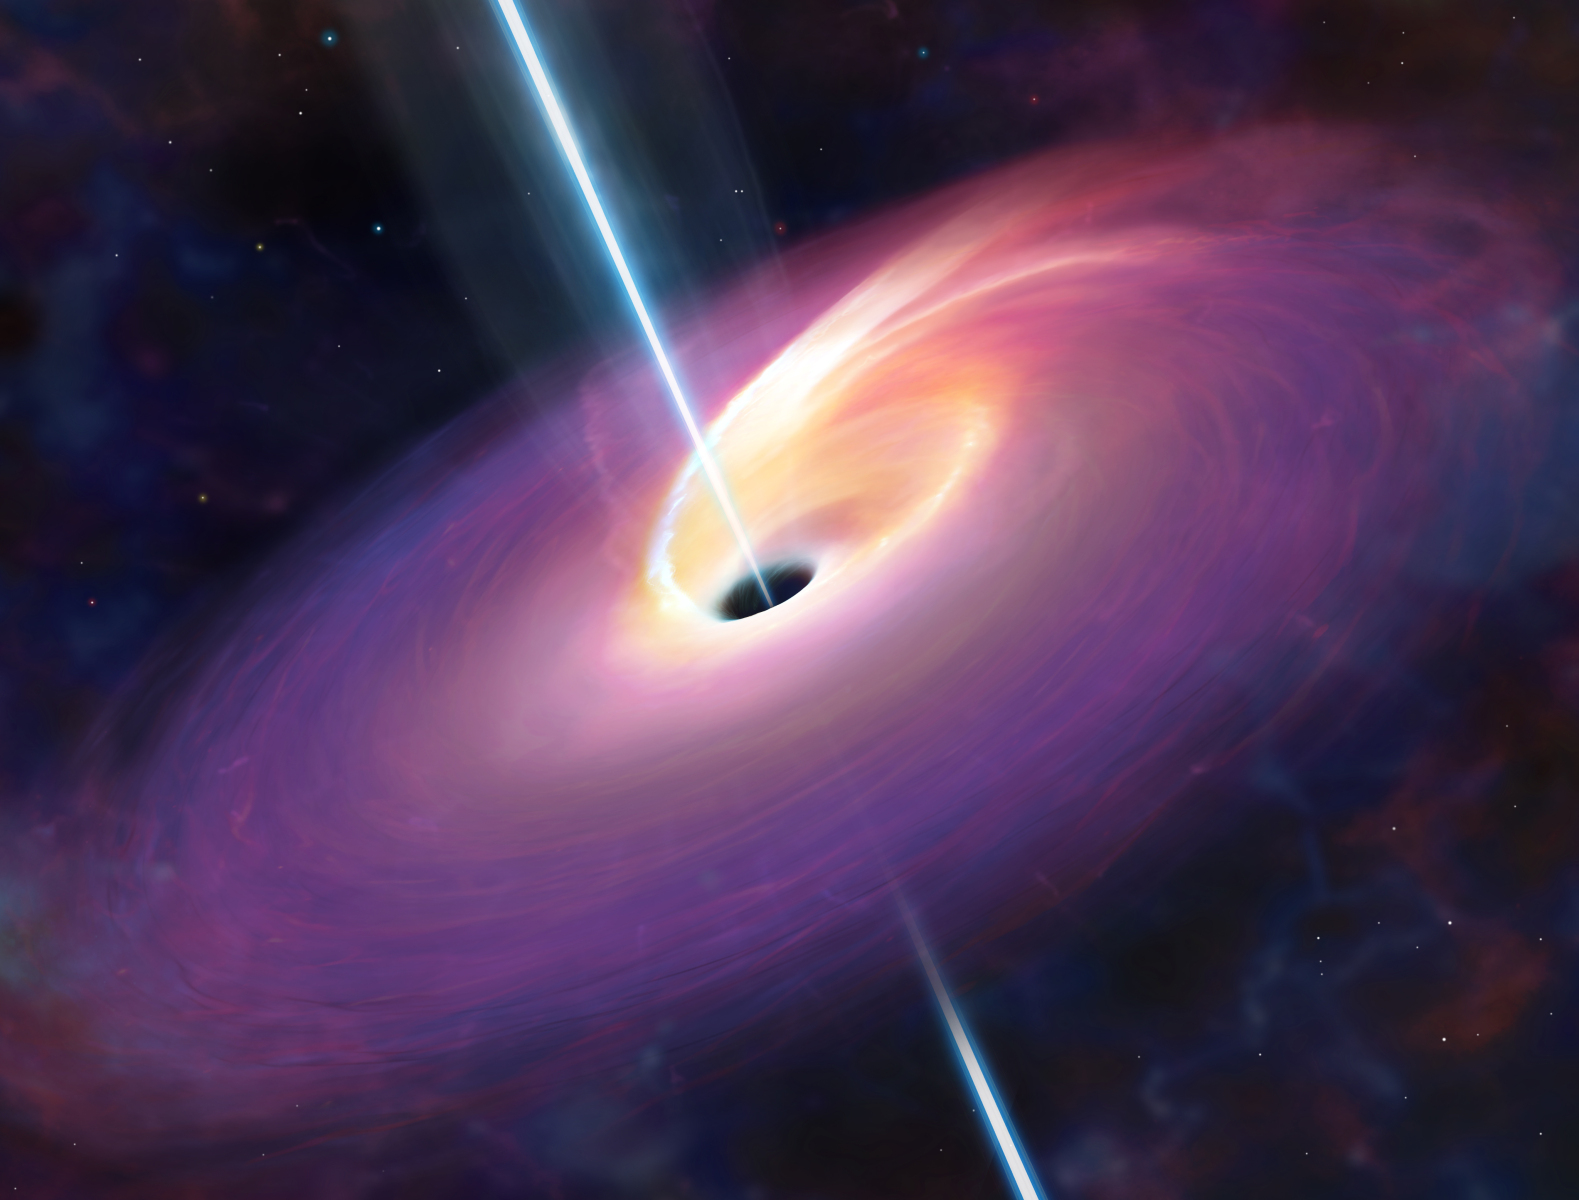 The aftermath of a large star being consumed by a black hole